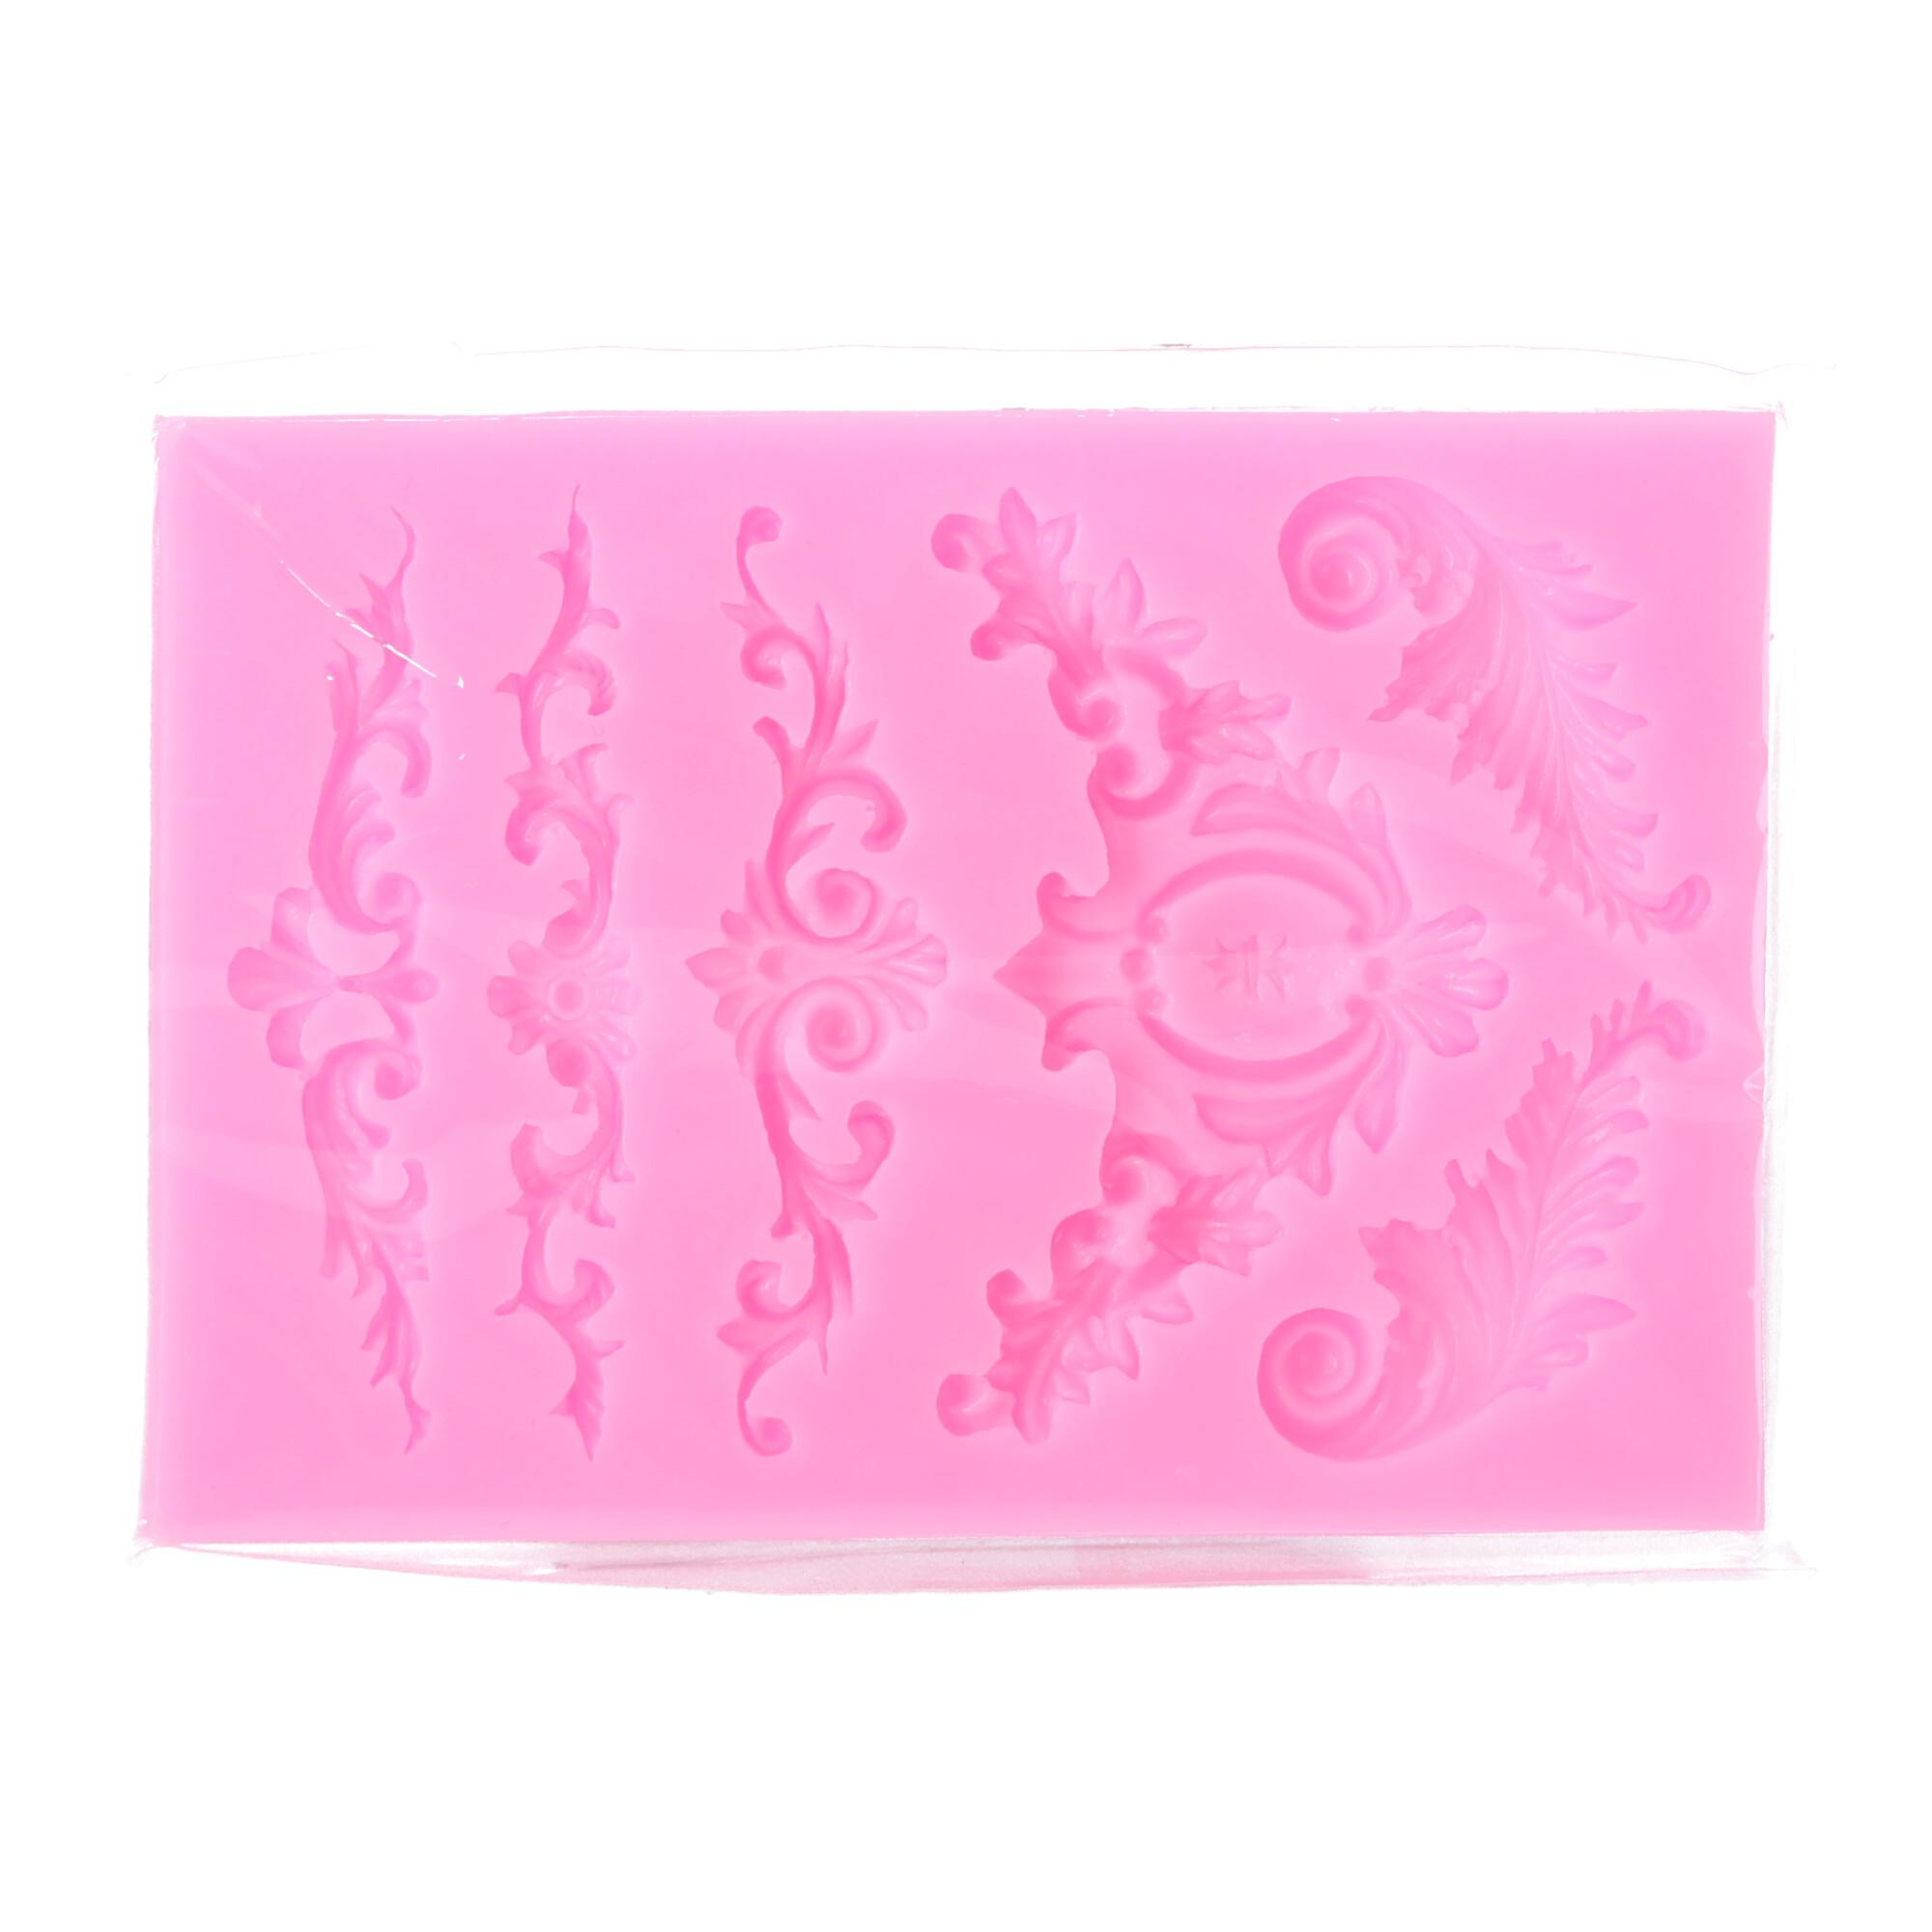 Silicone mold for decorating cakes, cake